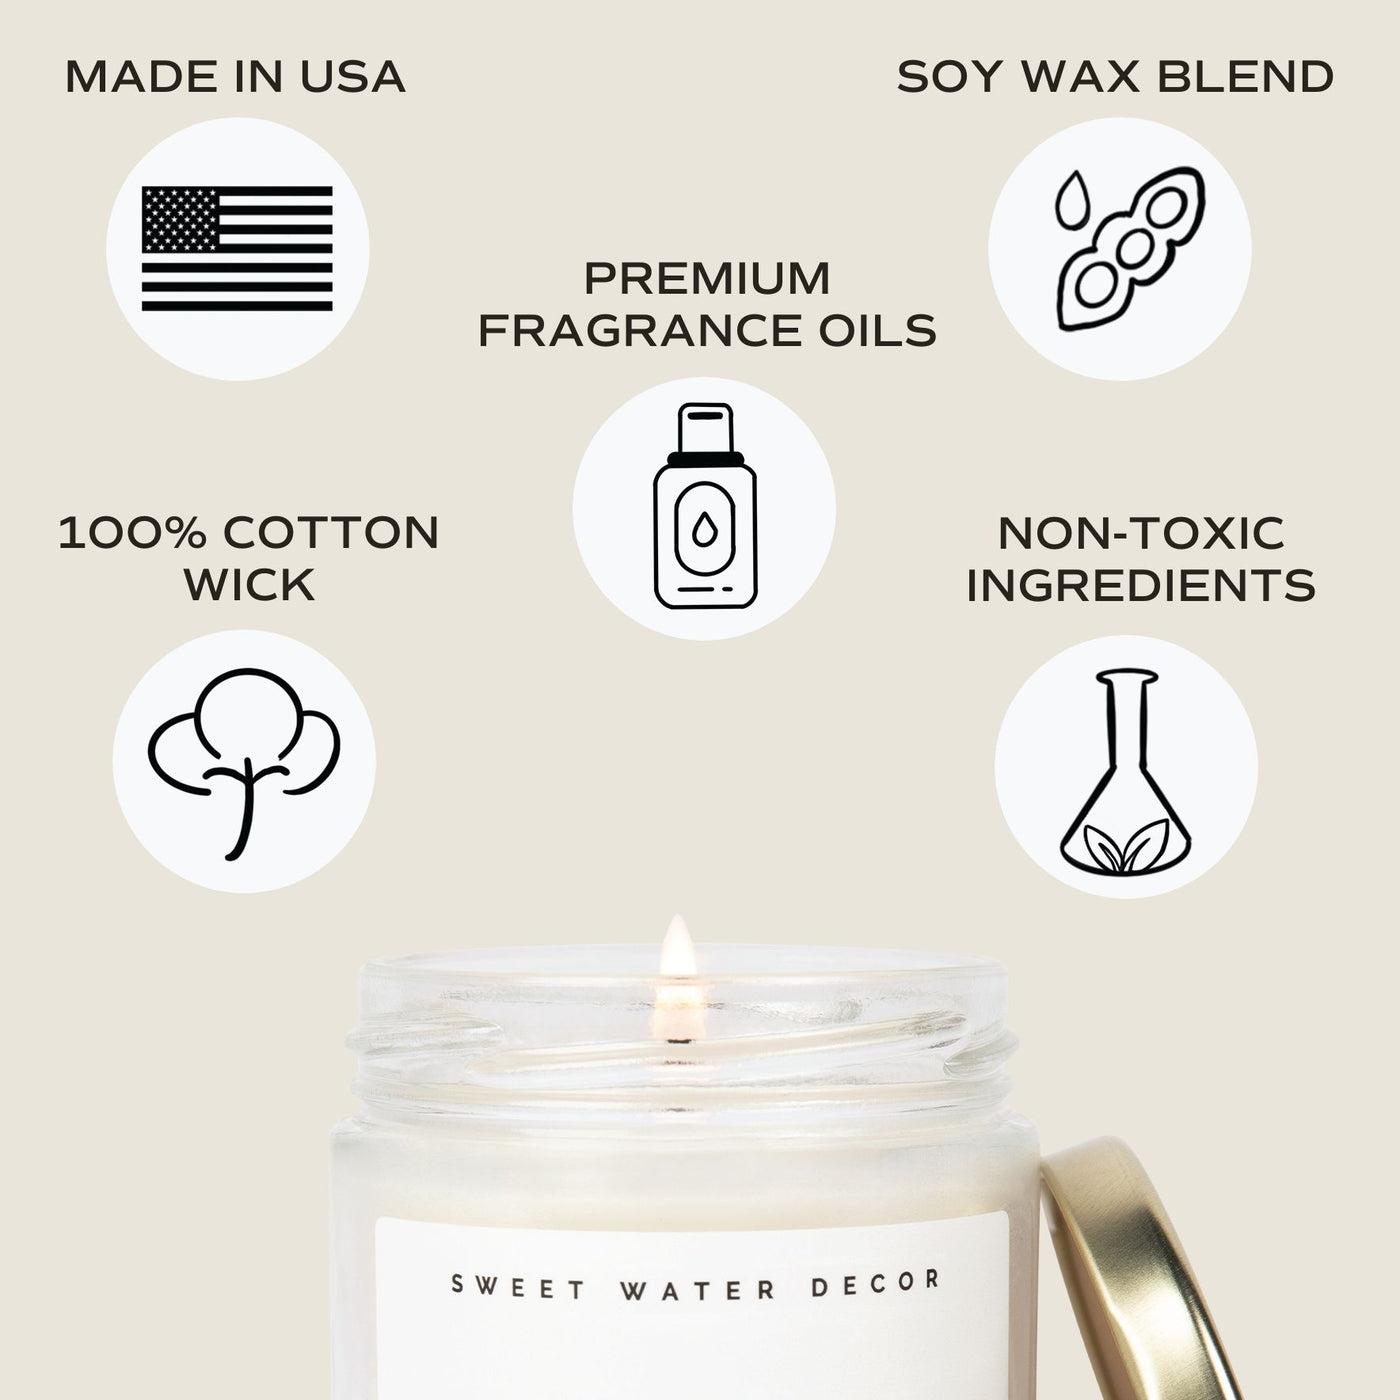 TOP 10 MUST-HAVE Mother's Day Candle Scents! #candles #diy